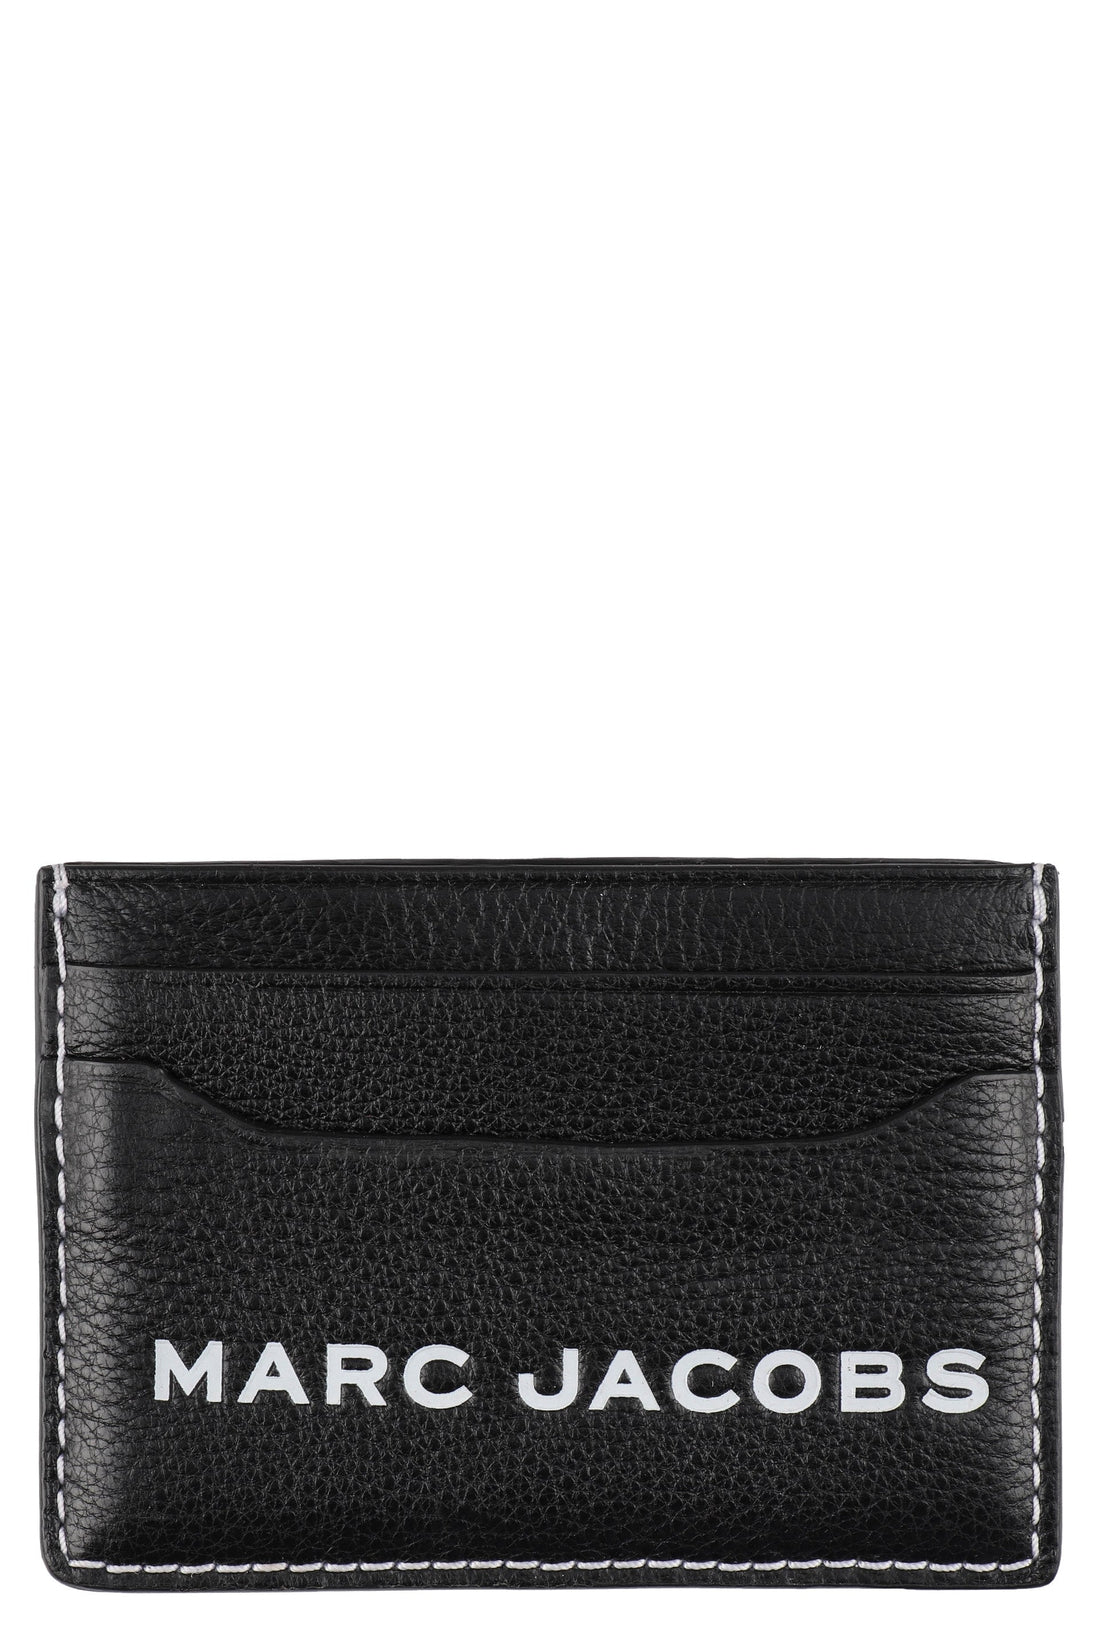 Marc Jacobs-OUTLET-SALE-The Textured Tag leather card holder-ARCHIVIST